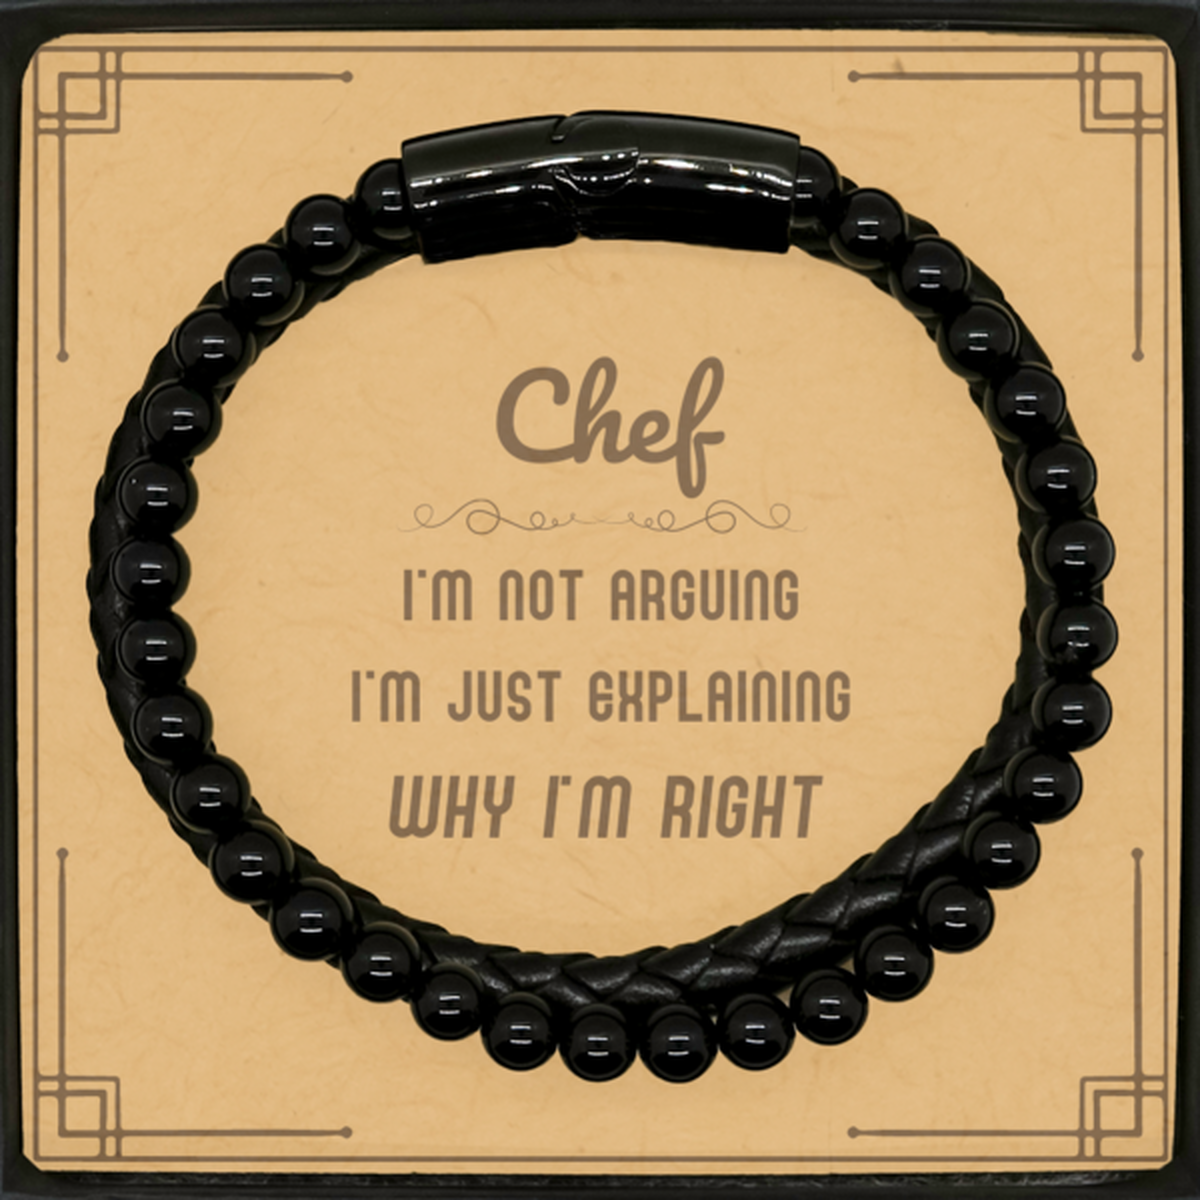 Chef I'm not Arguing. I'm Just Explaining Why I'm RIGHT Stone Leather Bracelets, Funny Saying Quote Chef Gifts For Chef Message Card Graduation Birthday Christmas Gifts for Men Women Coworker